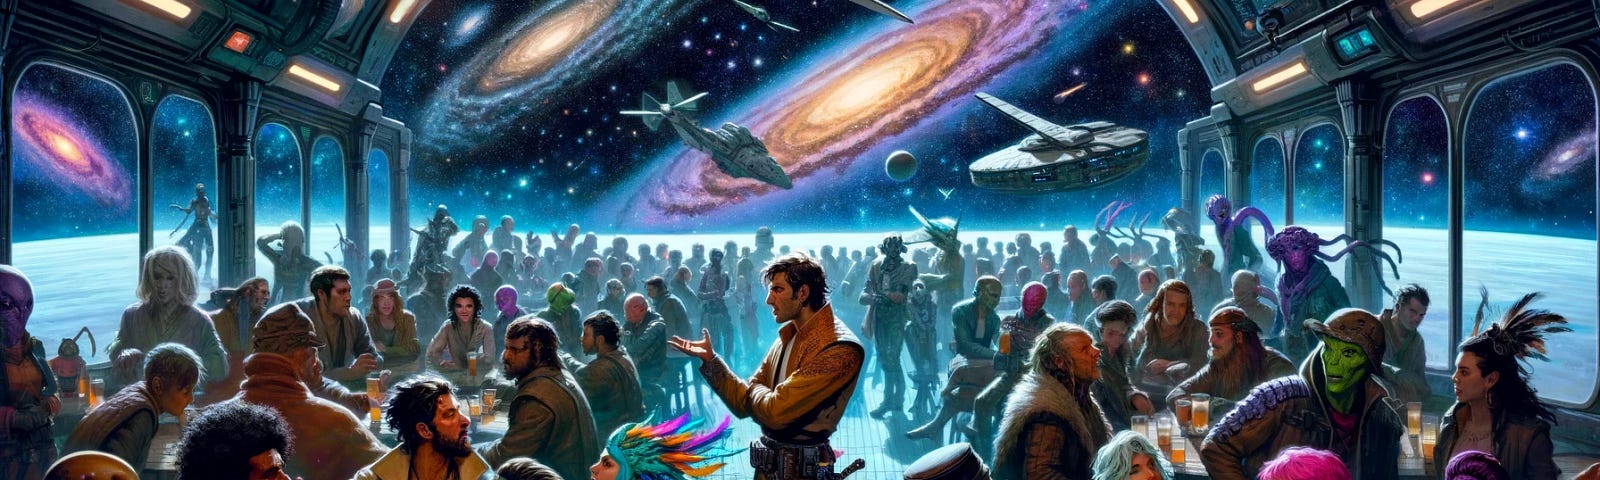 Engage with an epic debate in a space pub: Jax the bounty hunter and Lyra the pirate discuss parallel universes among a crowd of unique aliens, with the cosmos as their backdrop.